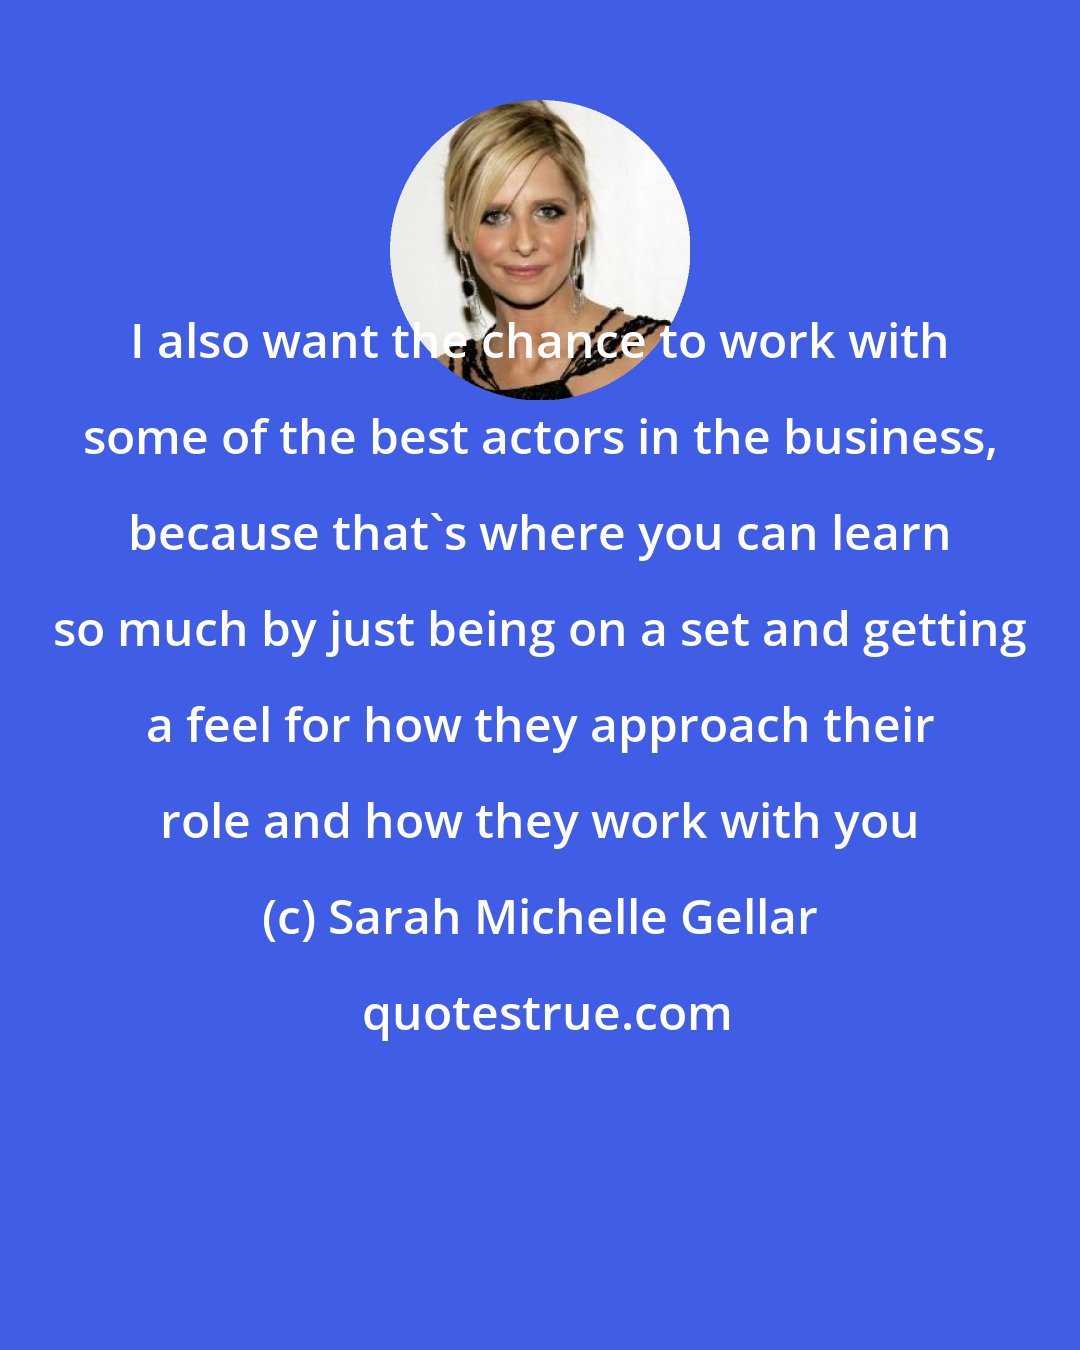 Sarah Michelle Gellar: I also want the chance to work with some of the best actors in the business, because that's where you can learn so much by just being on a set and getting a feel for how they approach their role and how they work with you